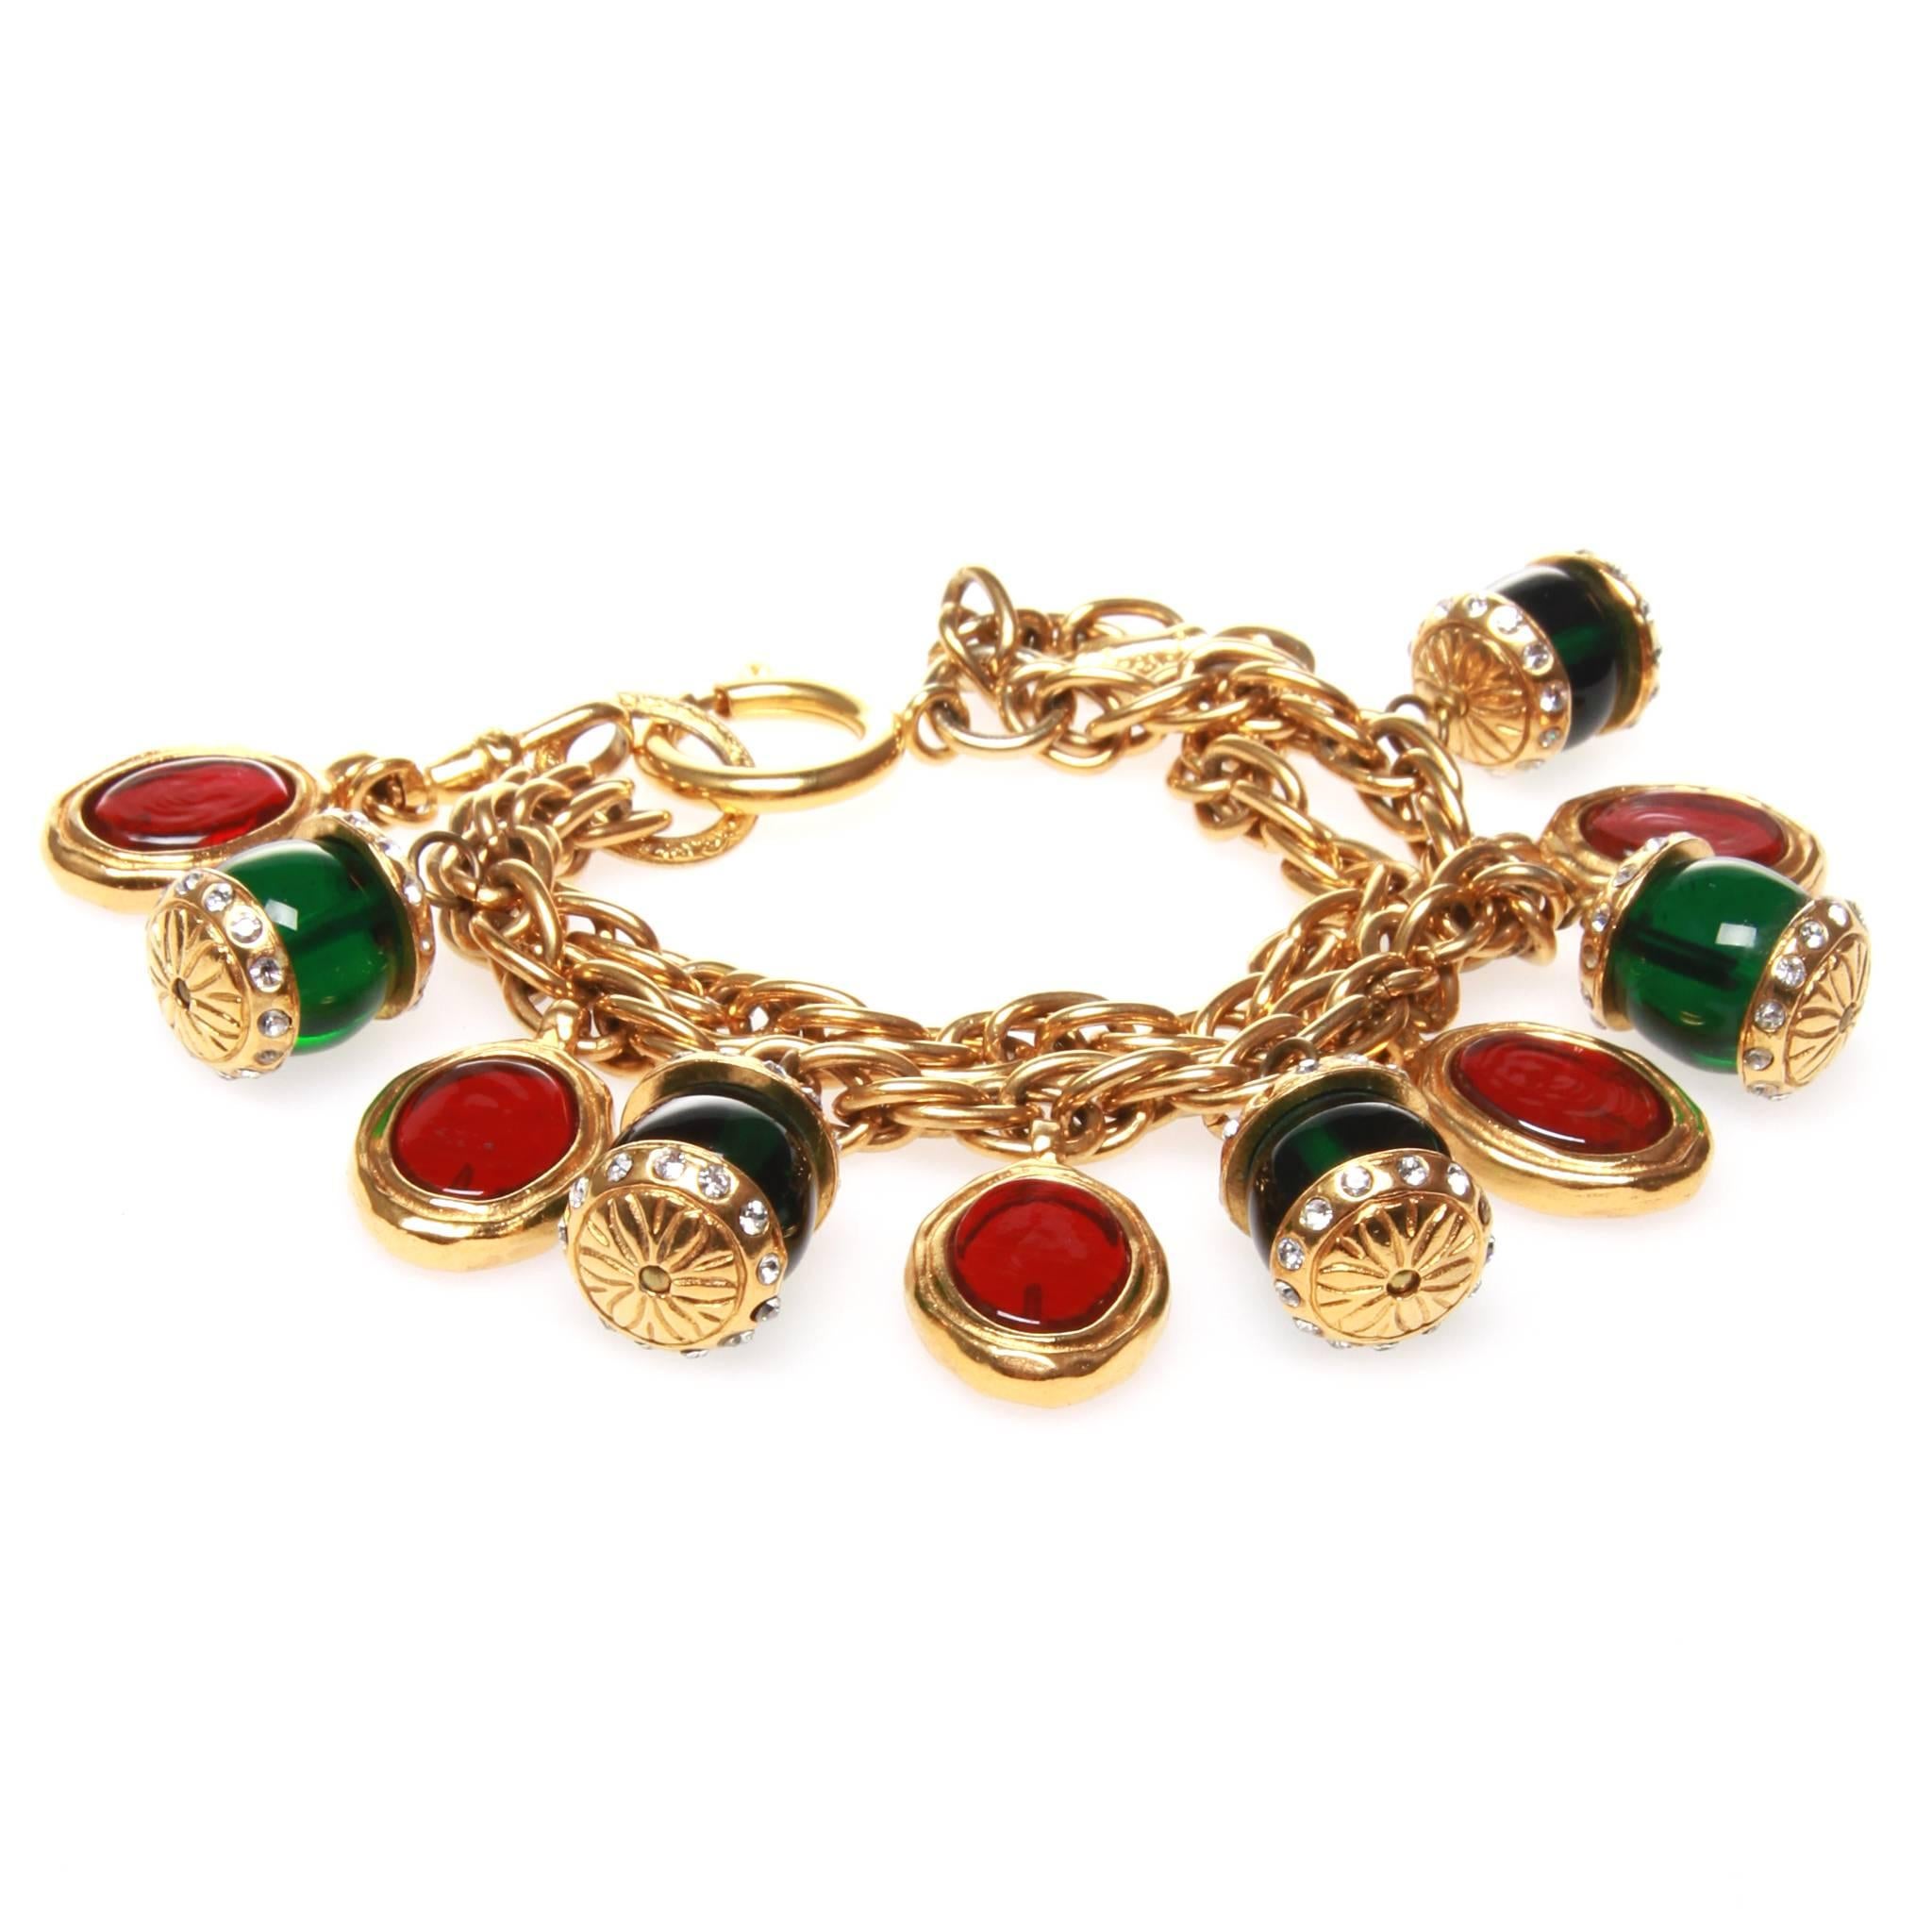 Vintage Chanel charm bracelet formed of two chains strung with red and green gripoix glass beads encrusted with crystals. Spring ring clasp and stamped plate on chain.